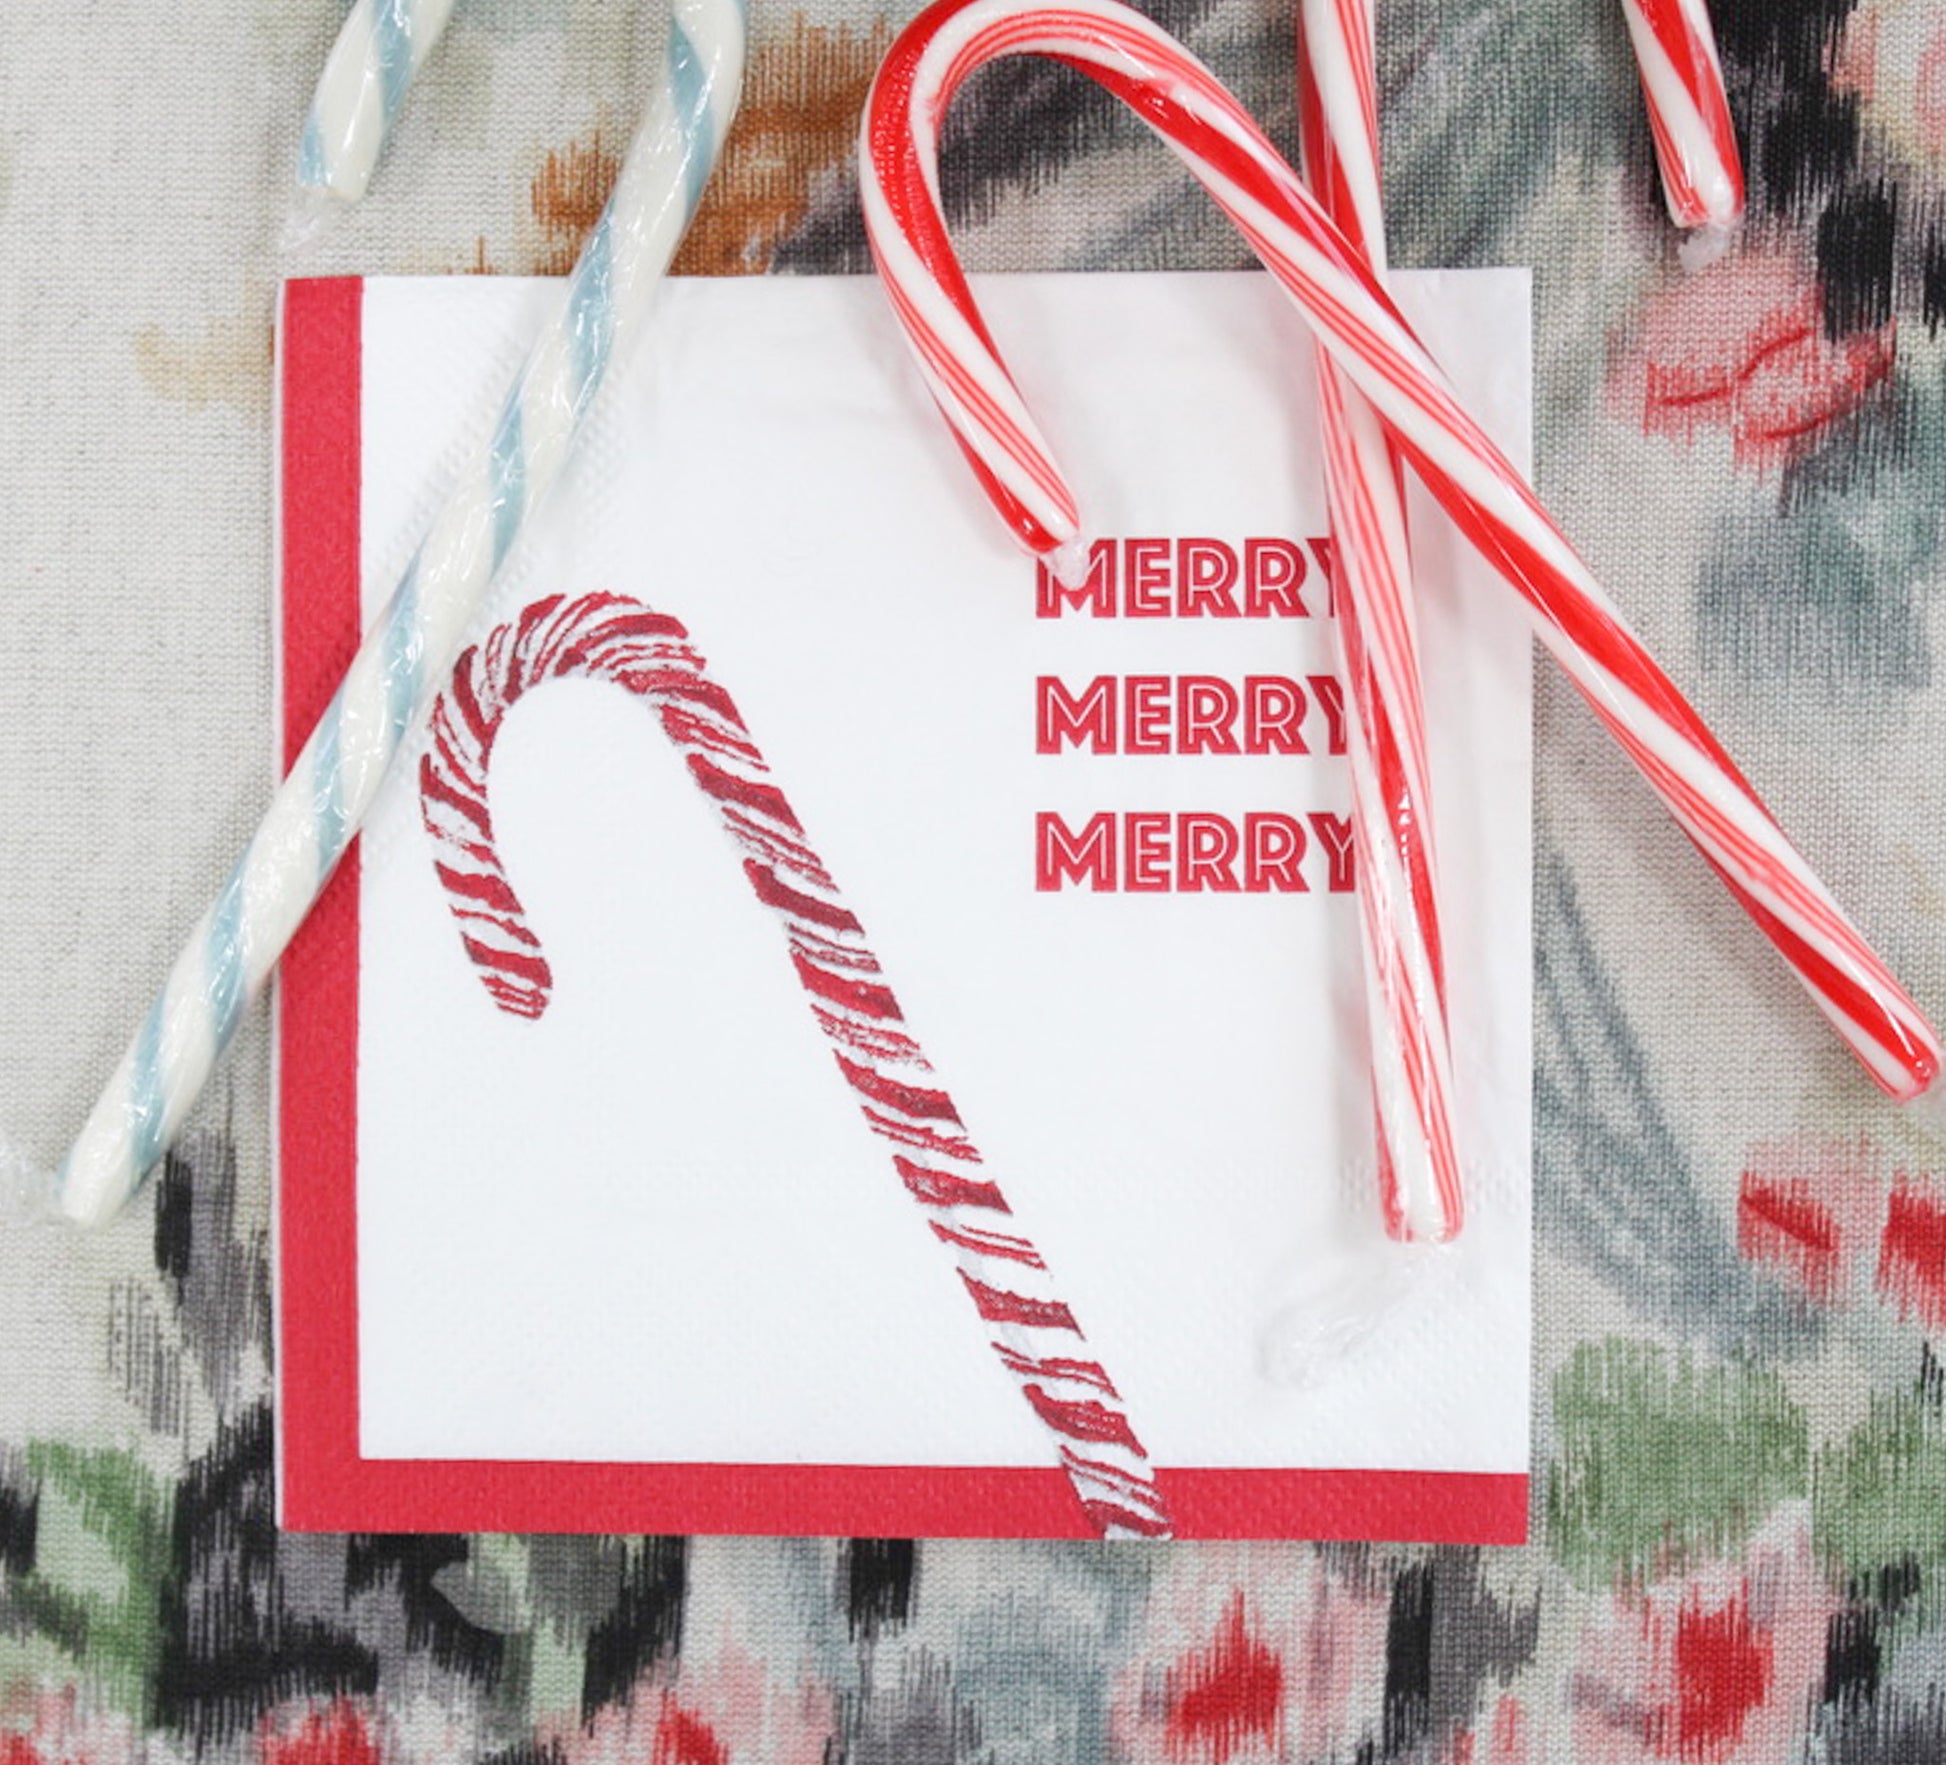 Merry Merry Merry paper napkin set by FOSTER